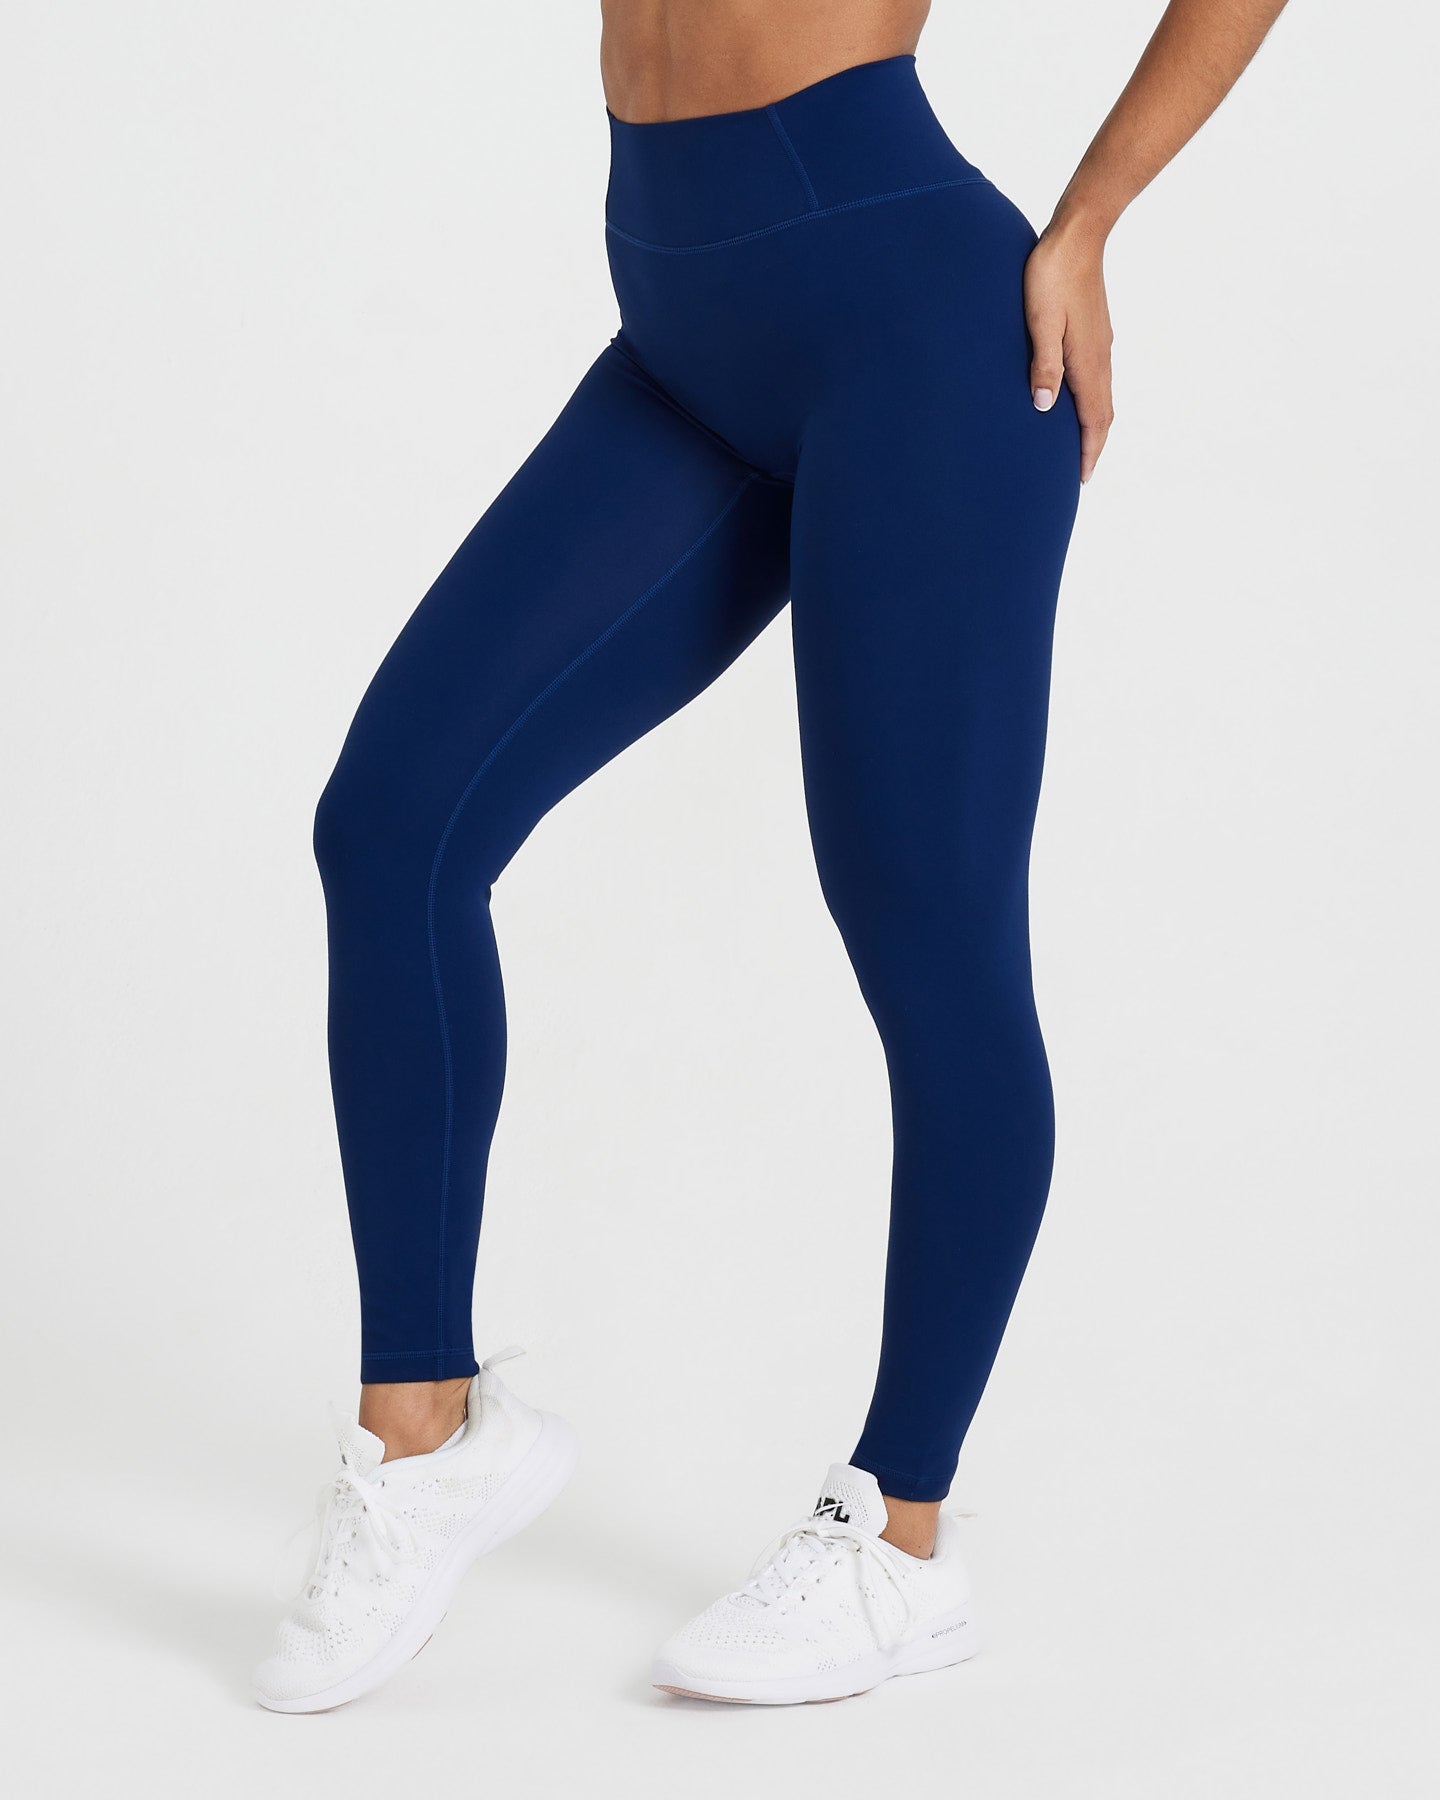 Women\'s Leggings with ultimate Separation | Glute Oner Active US